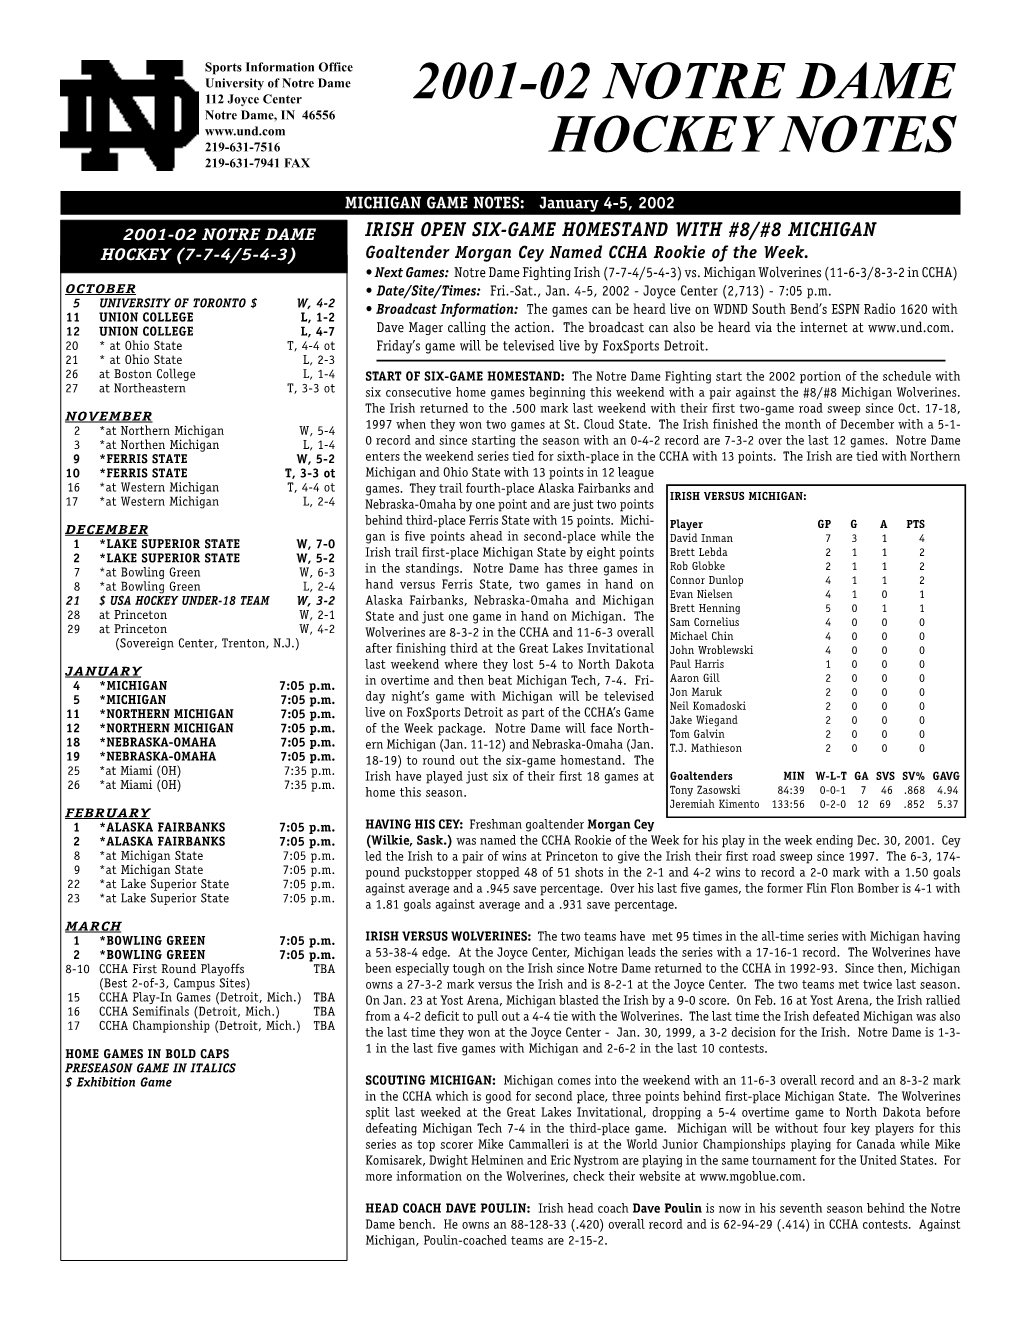 2001-02 Notre Dame Hockey Notes